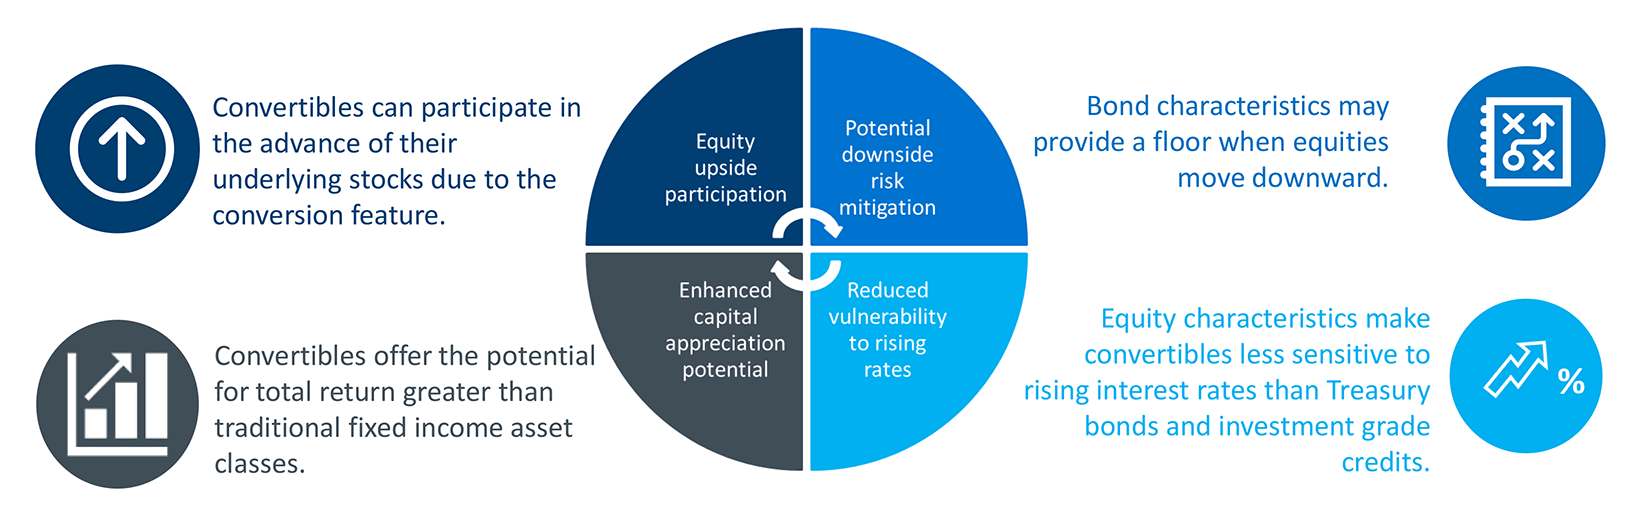 equity upside participation, potential downside risk mitigation, enhanced capital appreciation potential, reduced vulnerability to rising rates